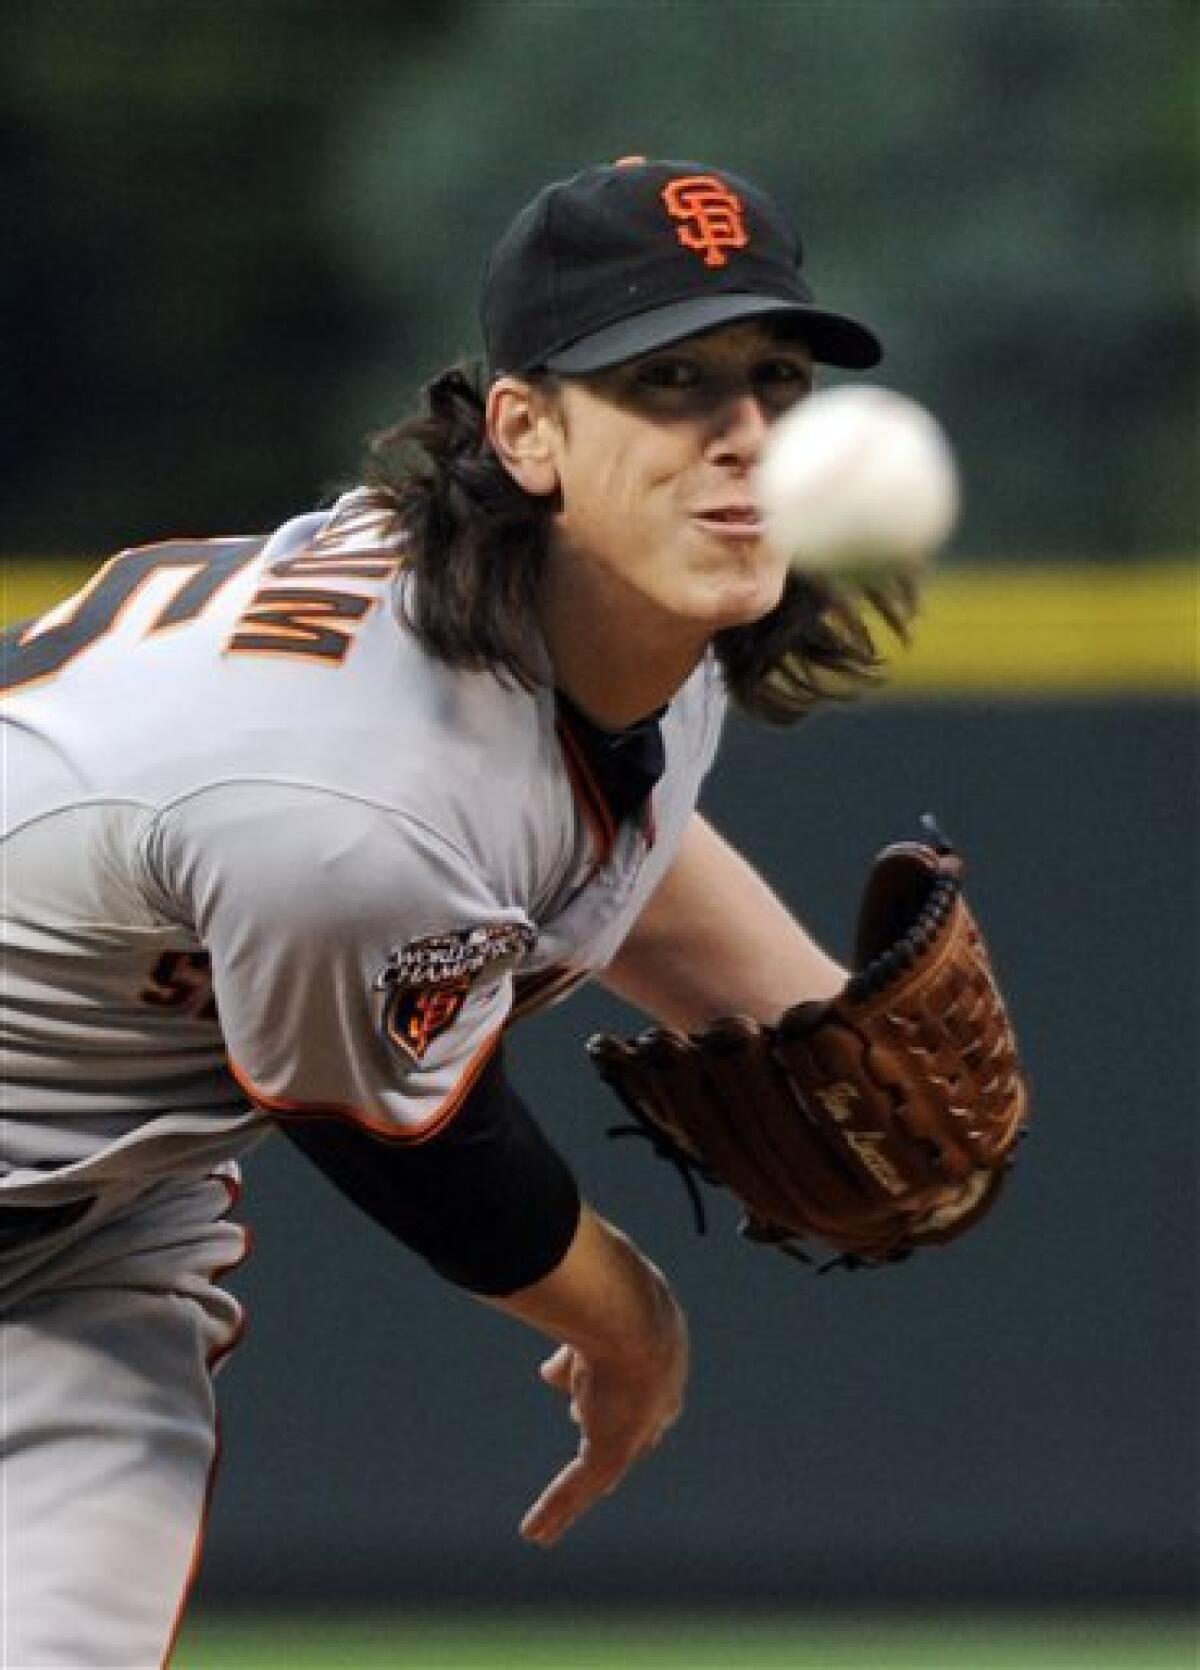 Tim Lincecum is trying to make an MLB comeback again